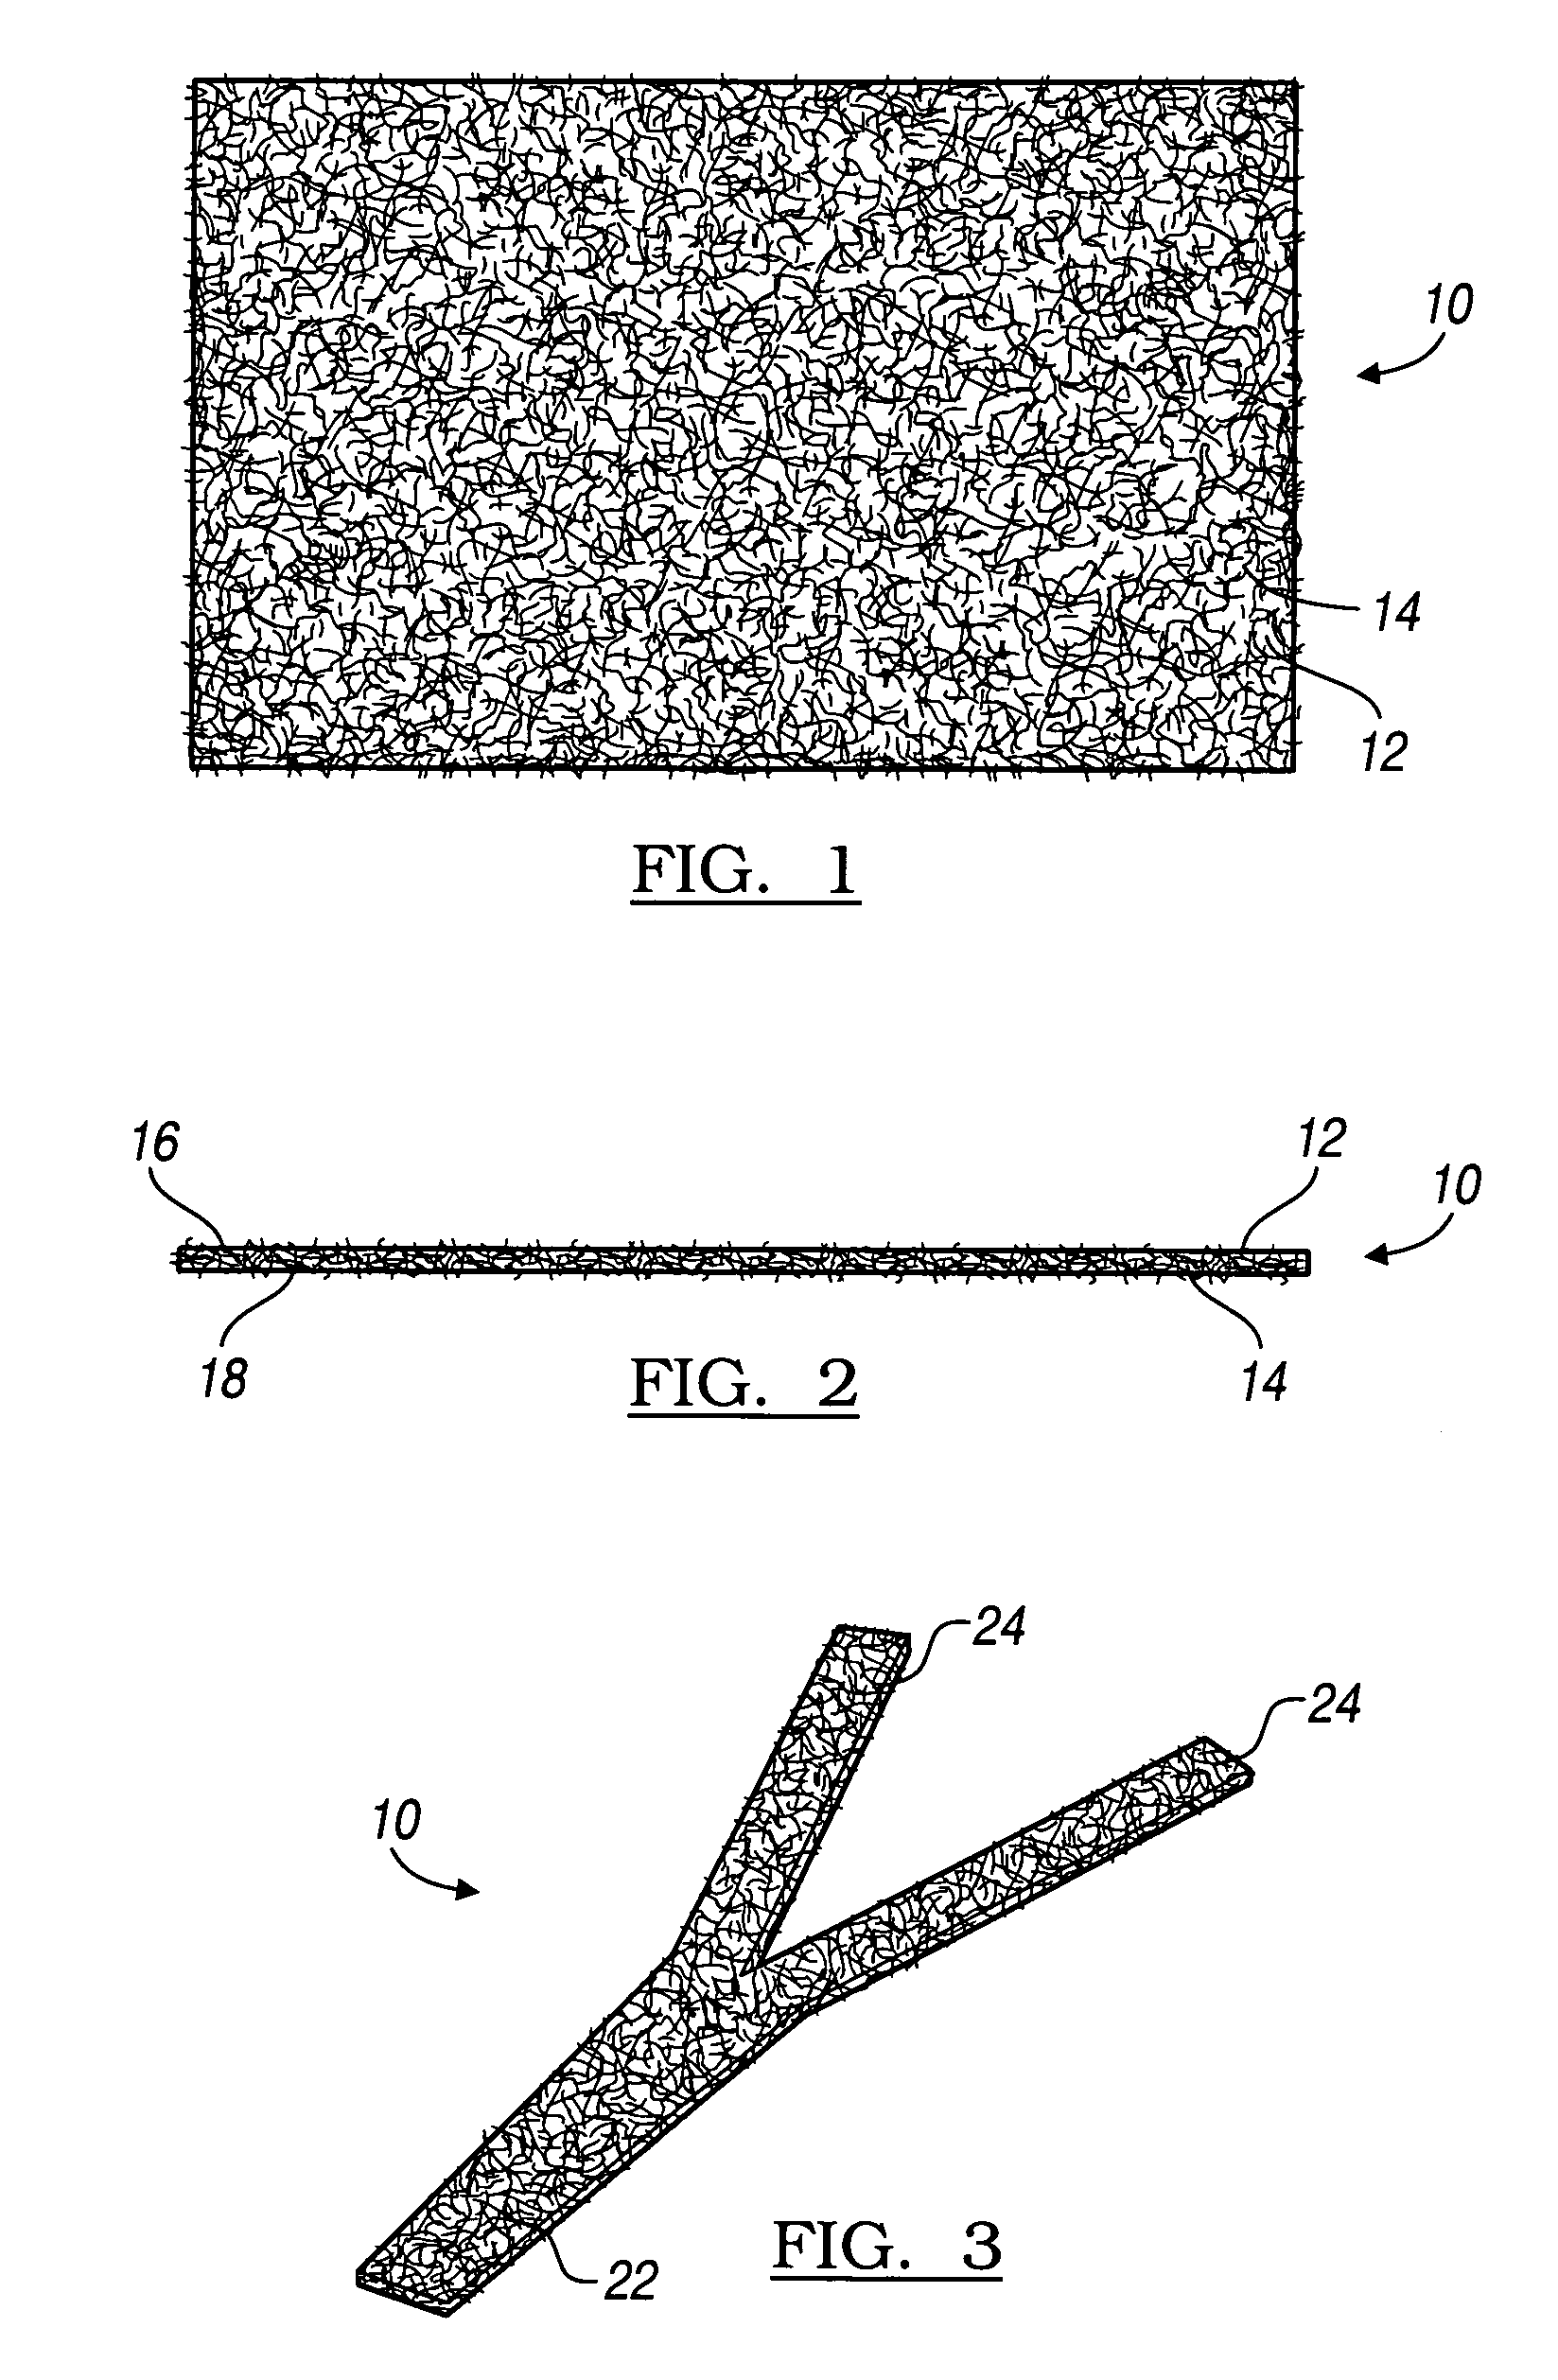 Composite collagen material and method of forming same